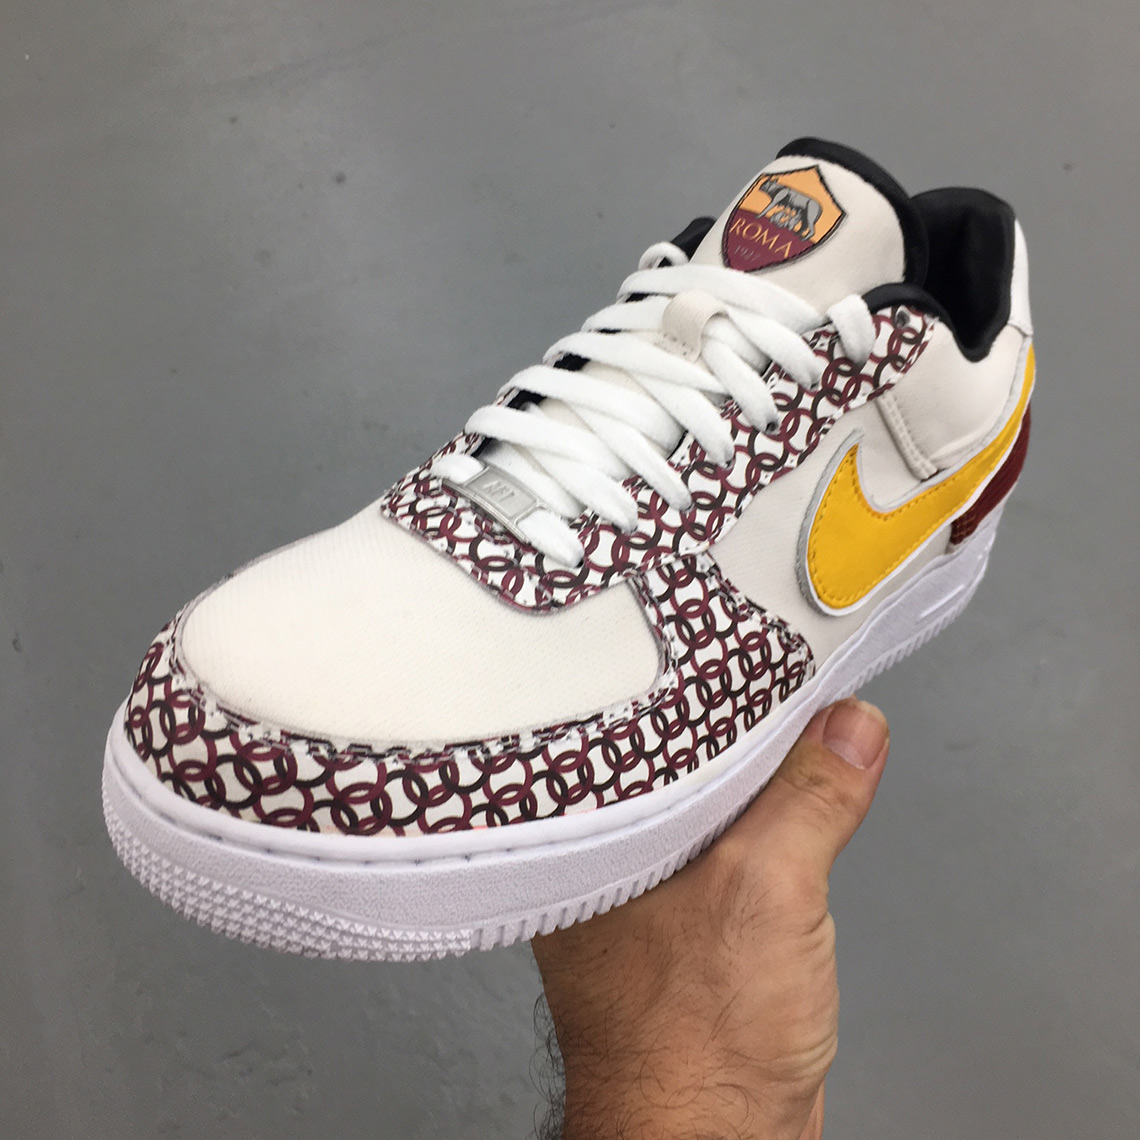 AS Roma Offer Chance To Win Customised Air Jordan 1 Mid - SoccerBible